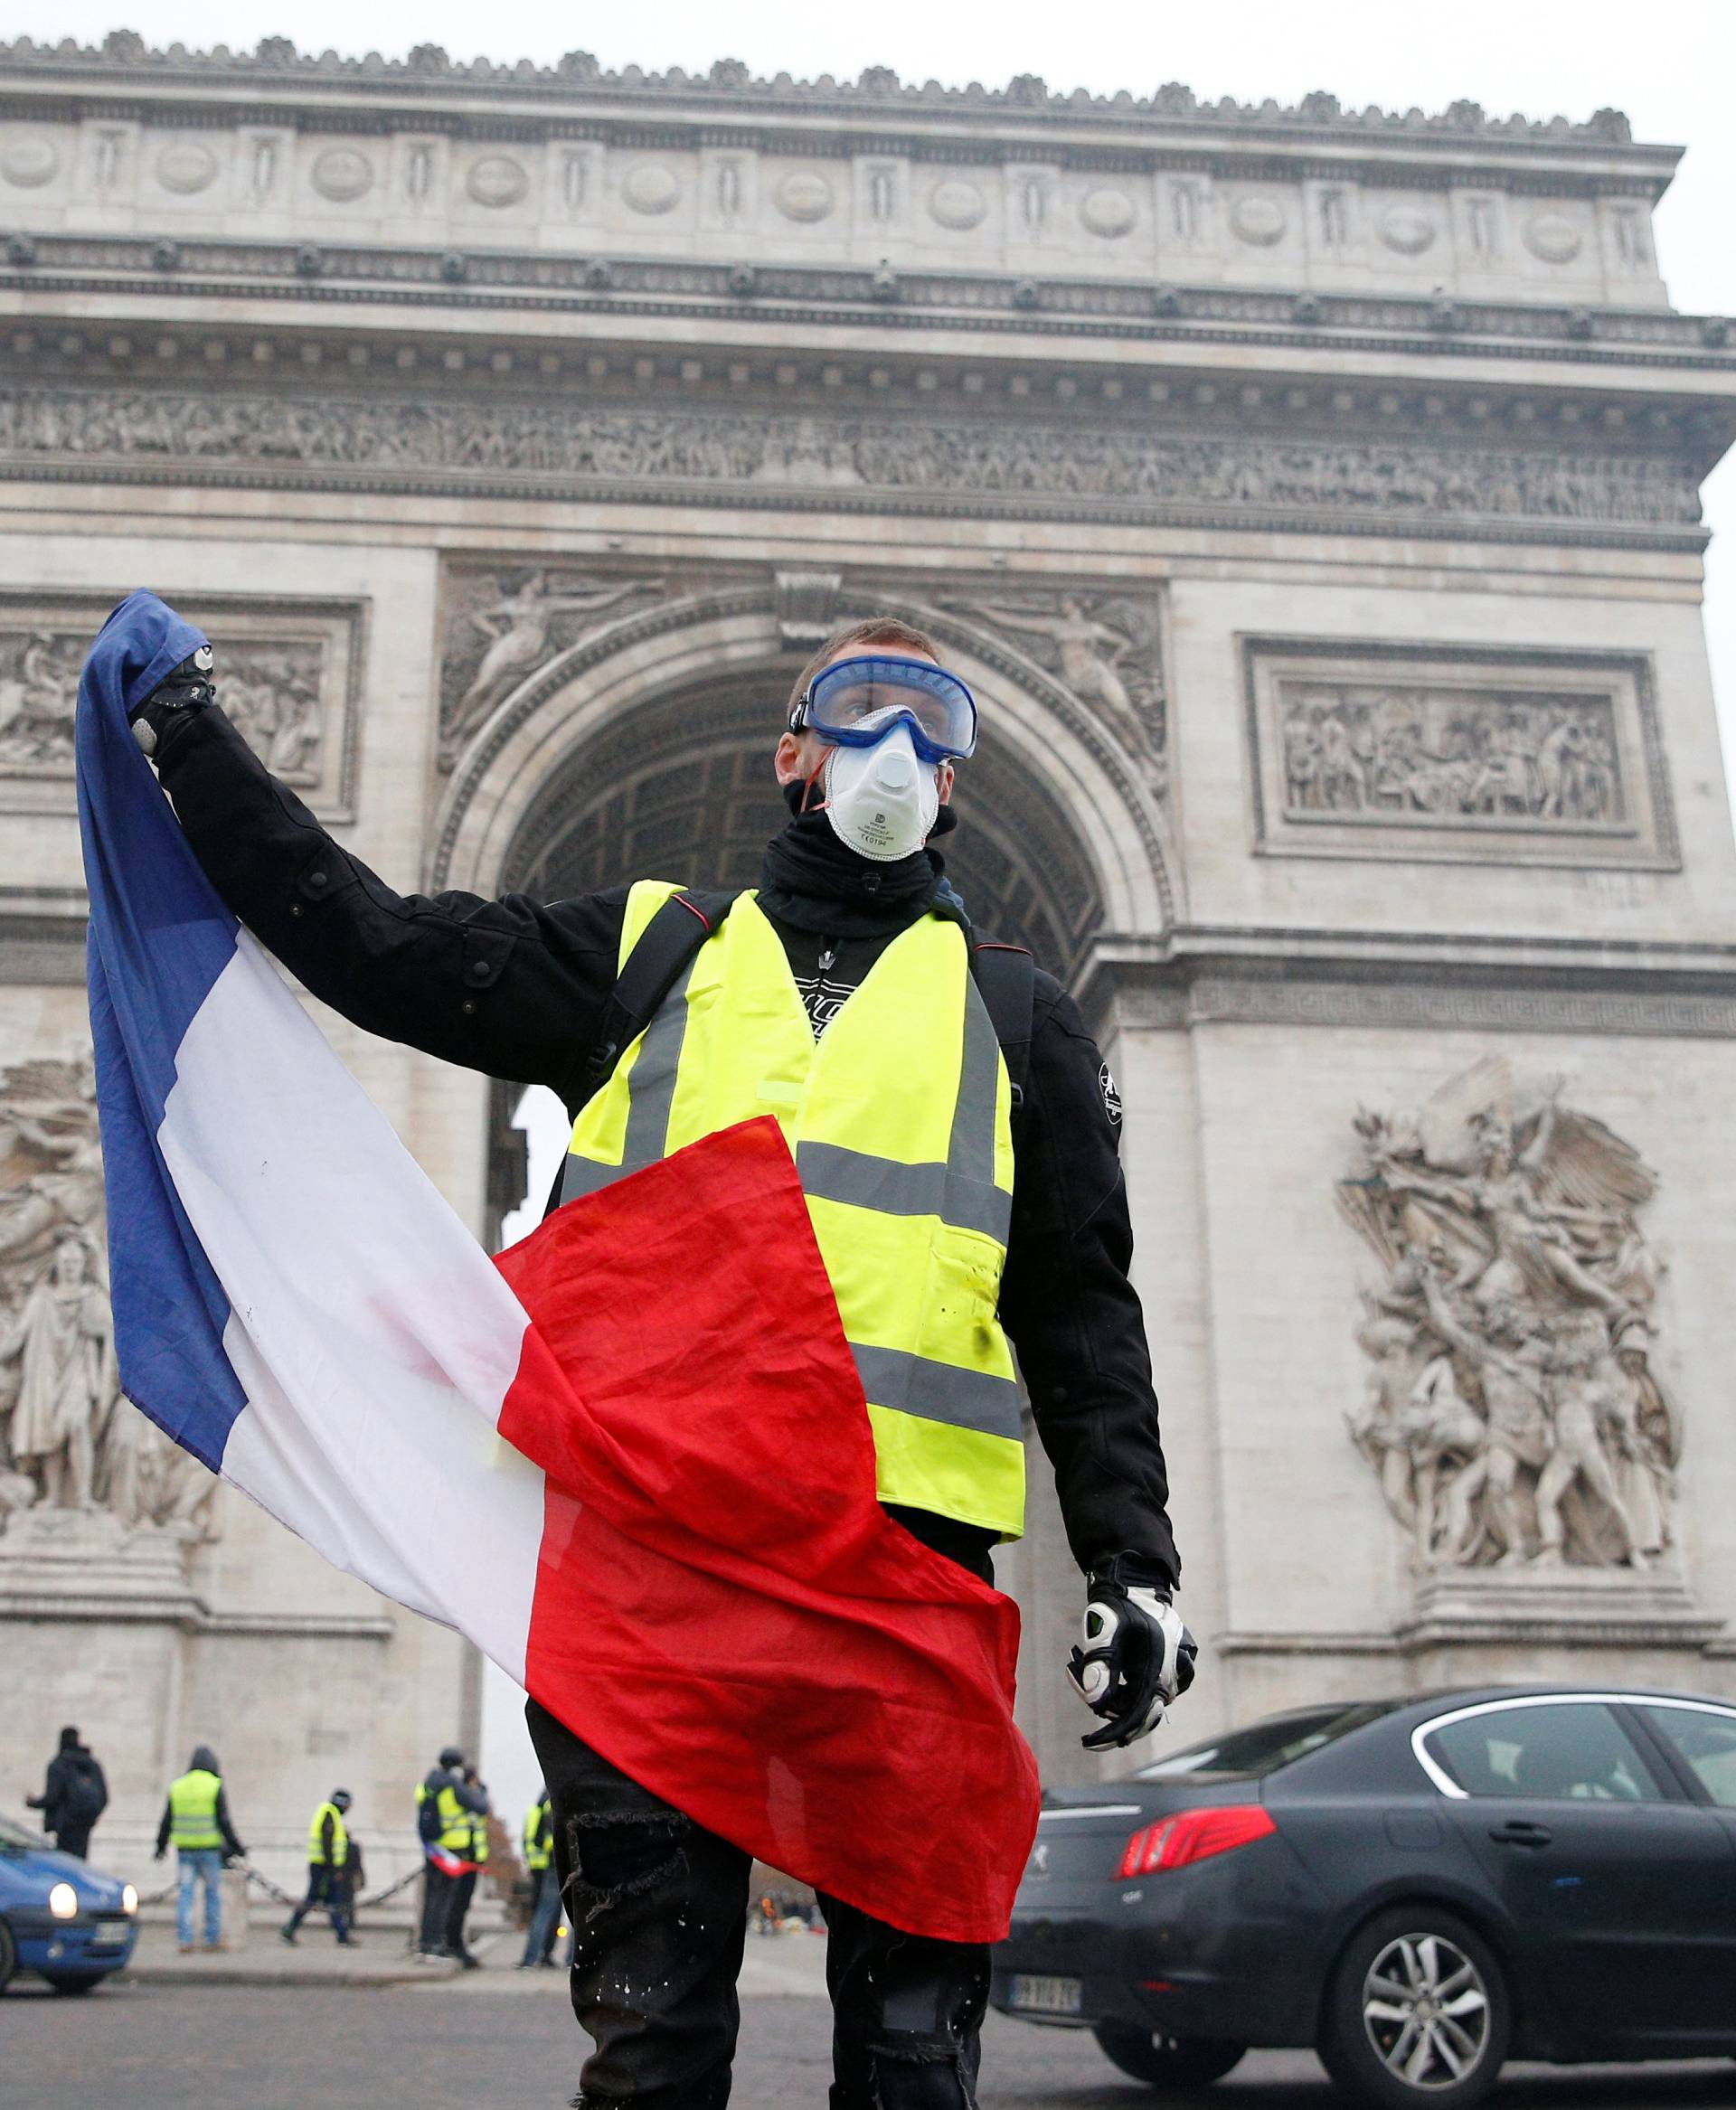 A man waves a French flag near the Arc de Triomphe as protesters wearing yellow vests, a symbol of a French drivers' protest against higher diesel taxes, demonstrate in Paris